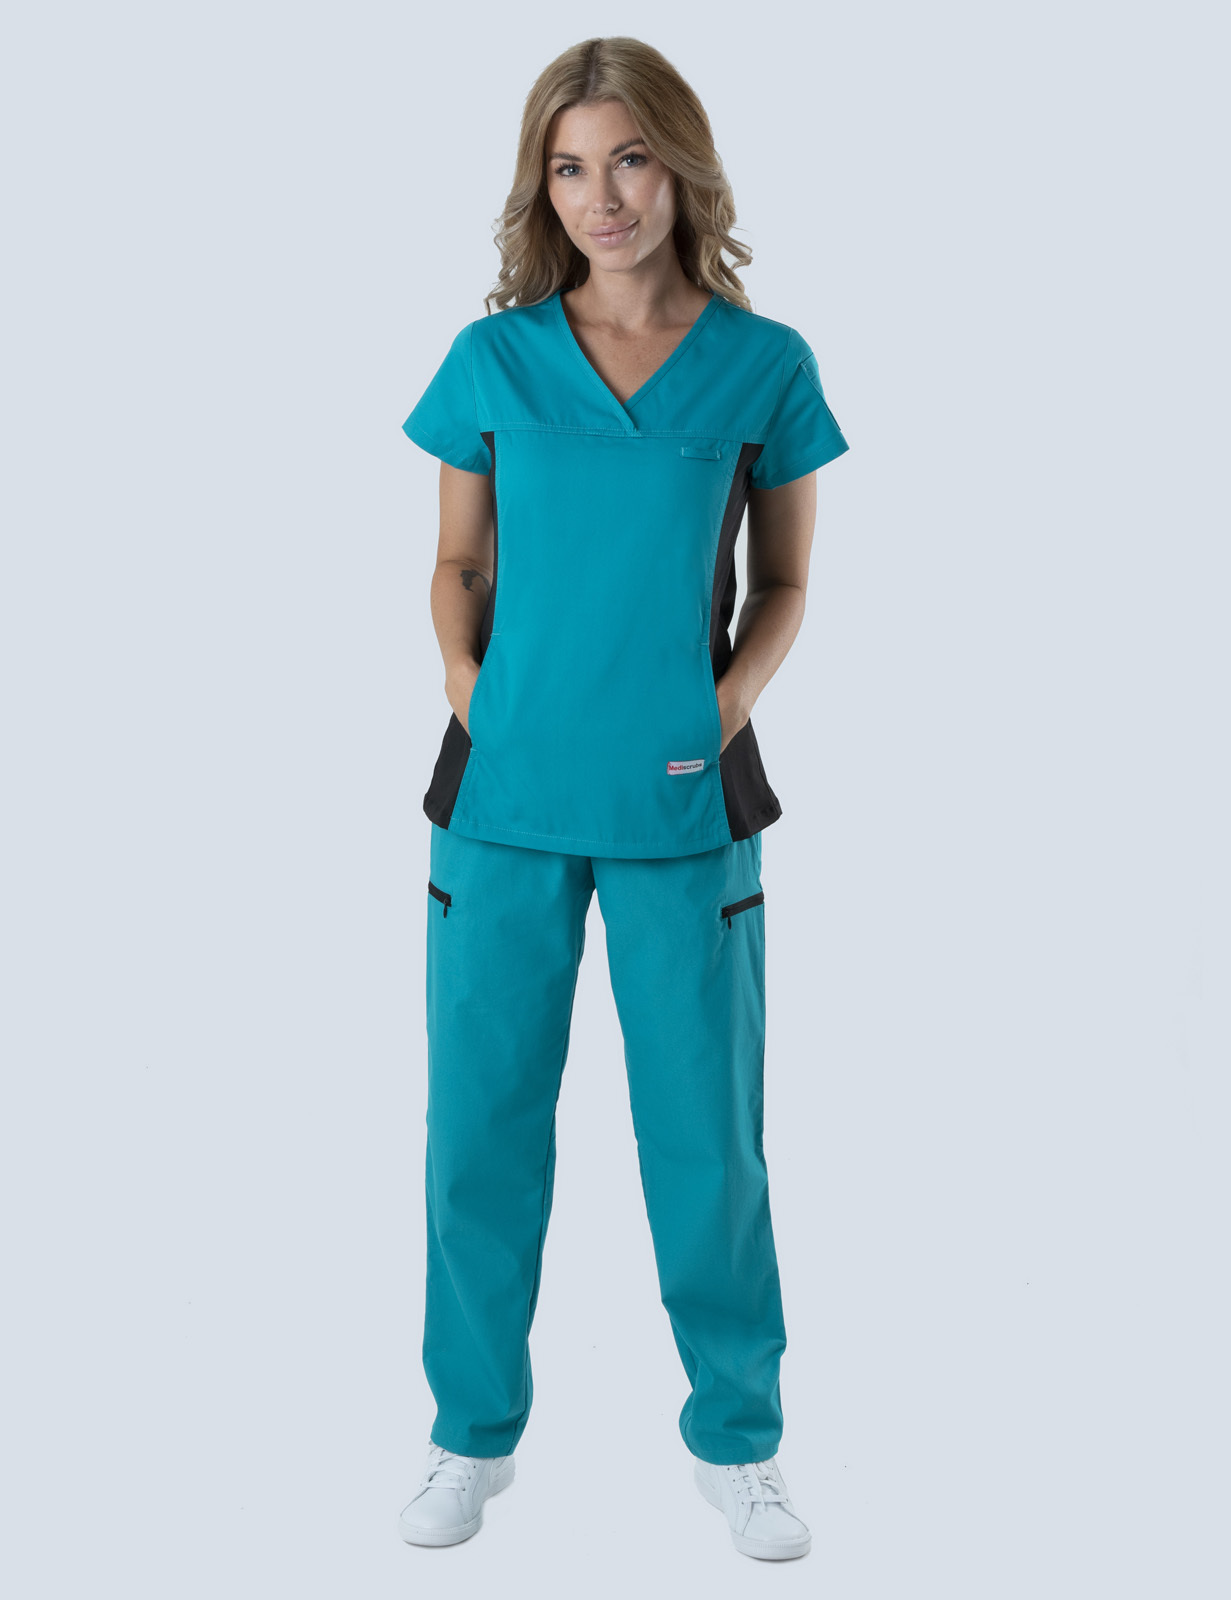 Women's Fit Solid Scrub Top With Spandex Panel - Teal - X Small